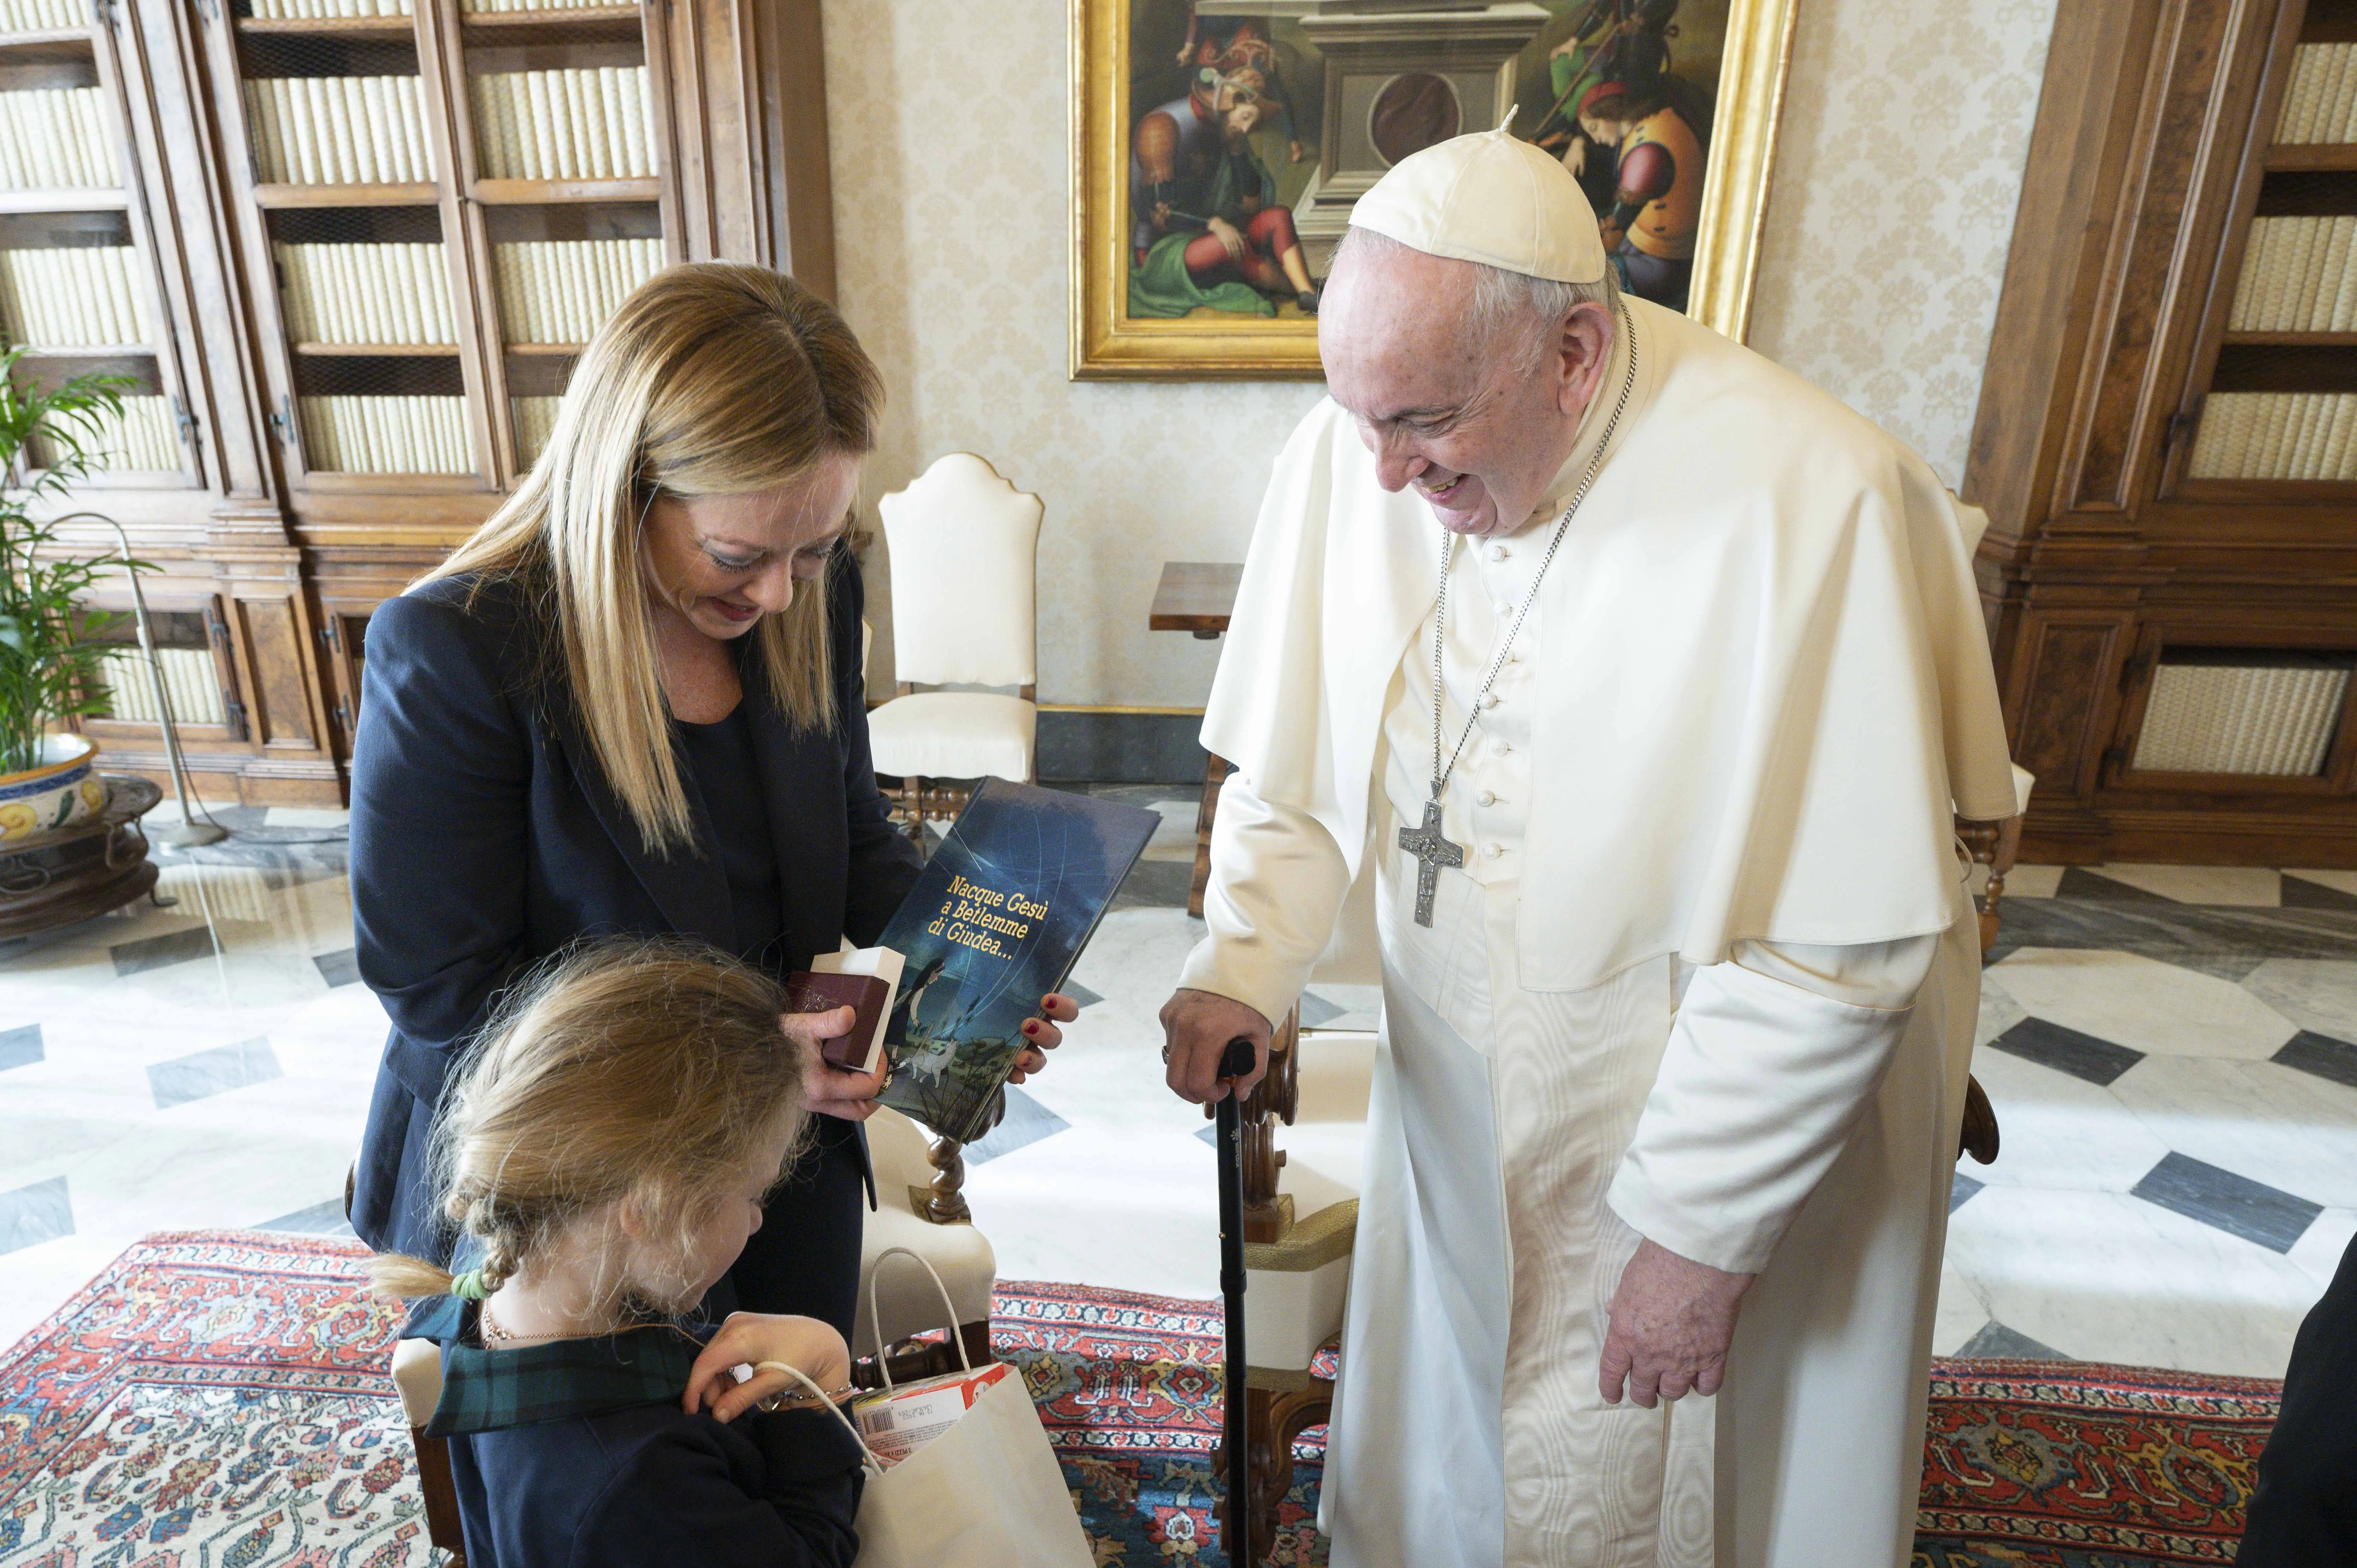 Italian Giorgia Meloni; her daughter, Ginevra Giambruno; and Pope Francis meet in the apostolic palace on Jan. 10, 2023. Credit: Vatican Media